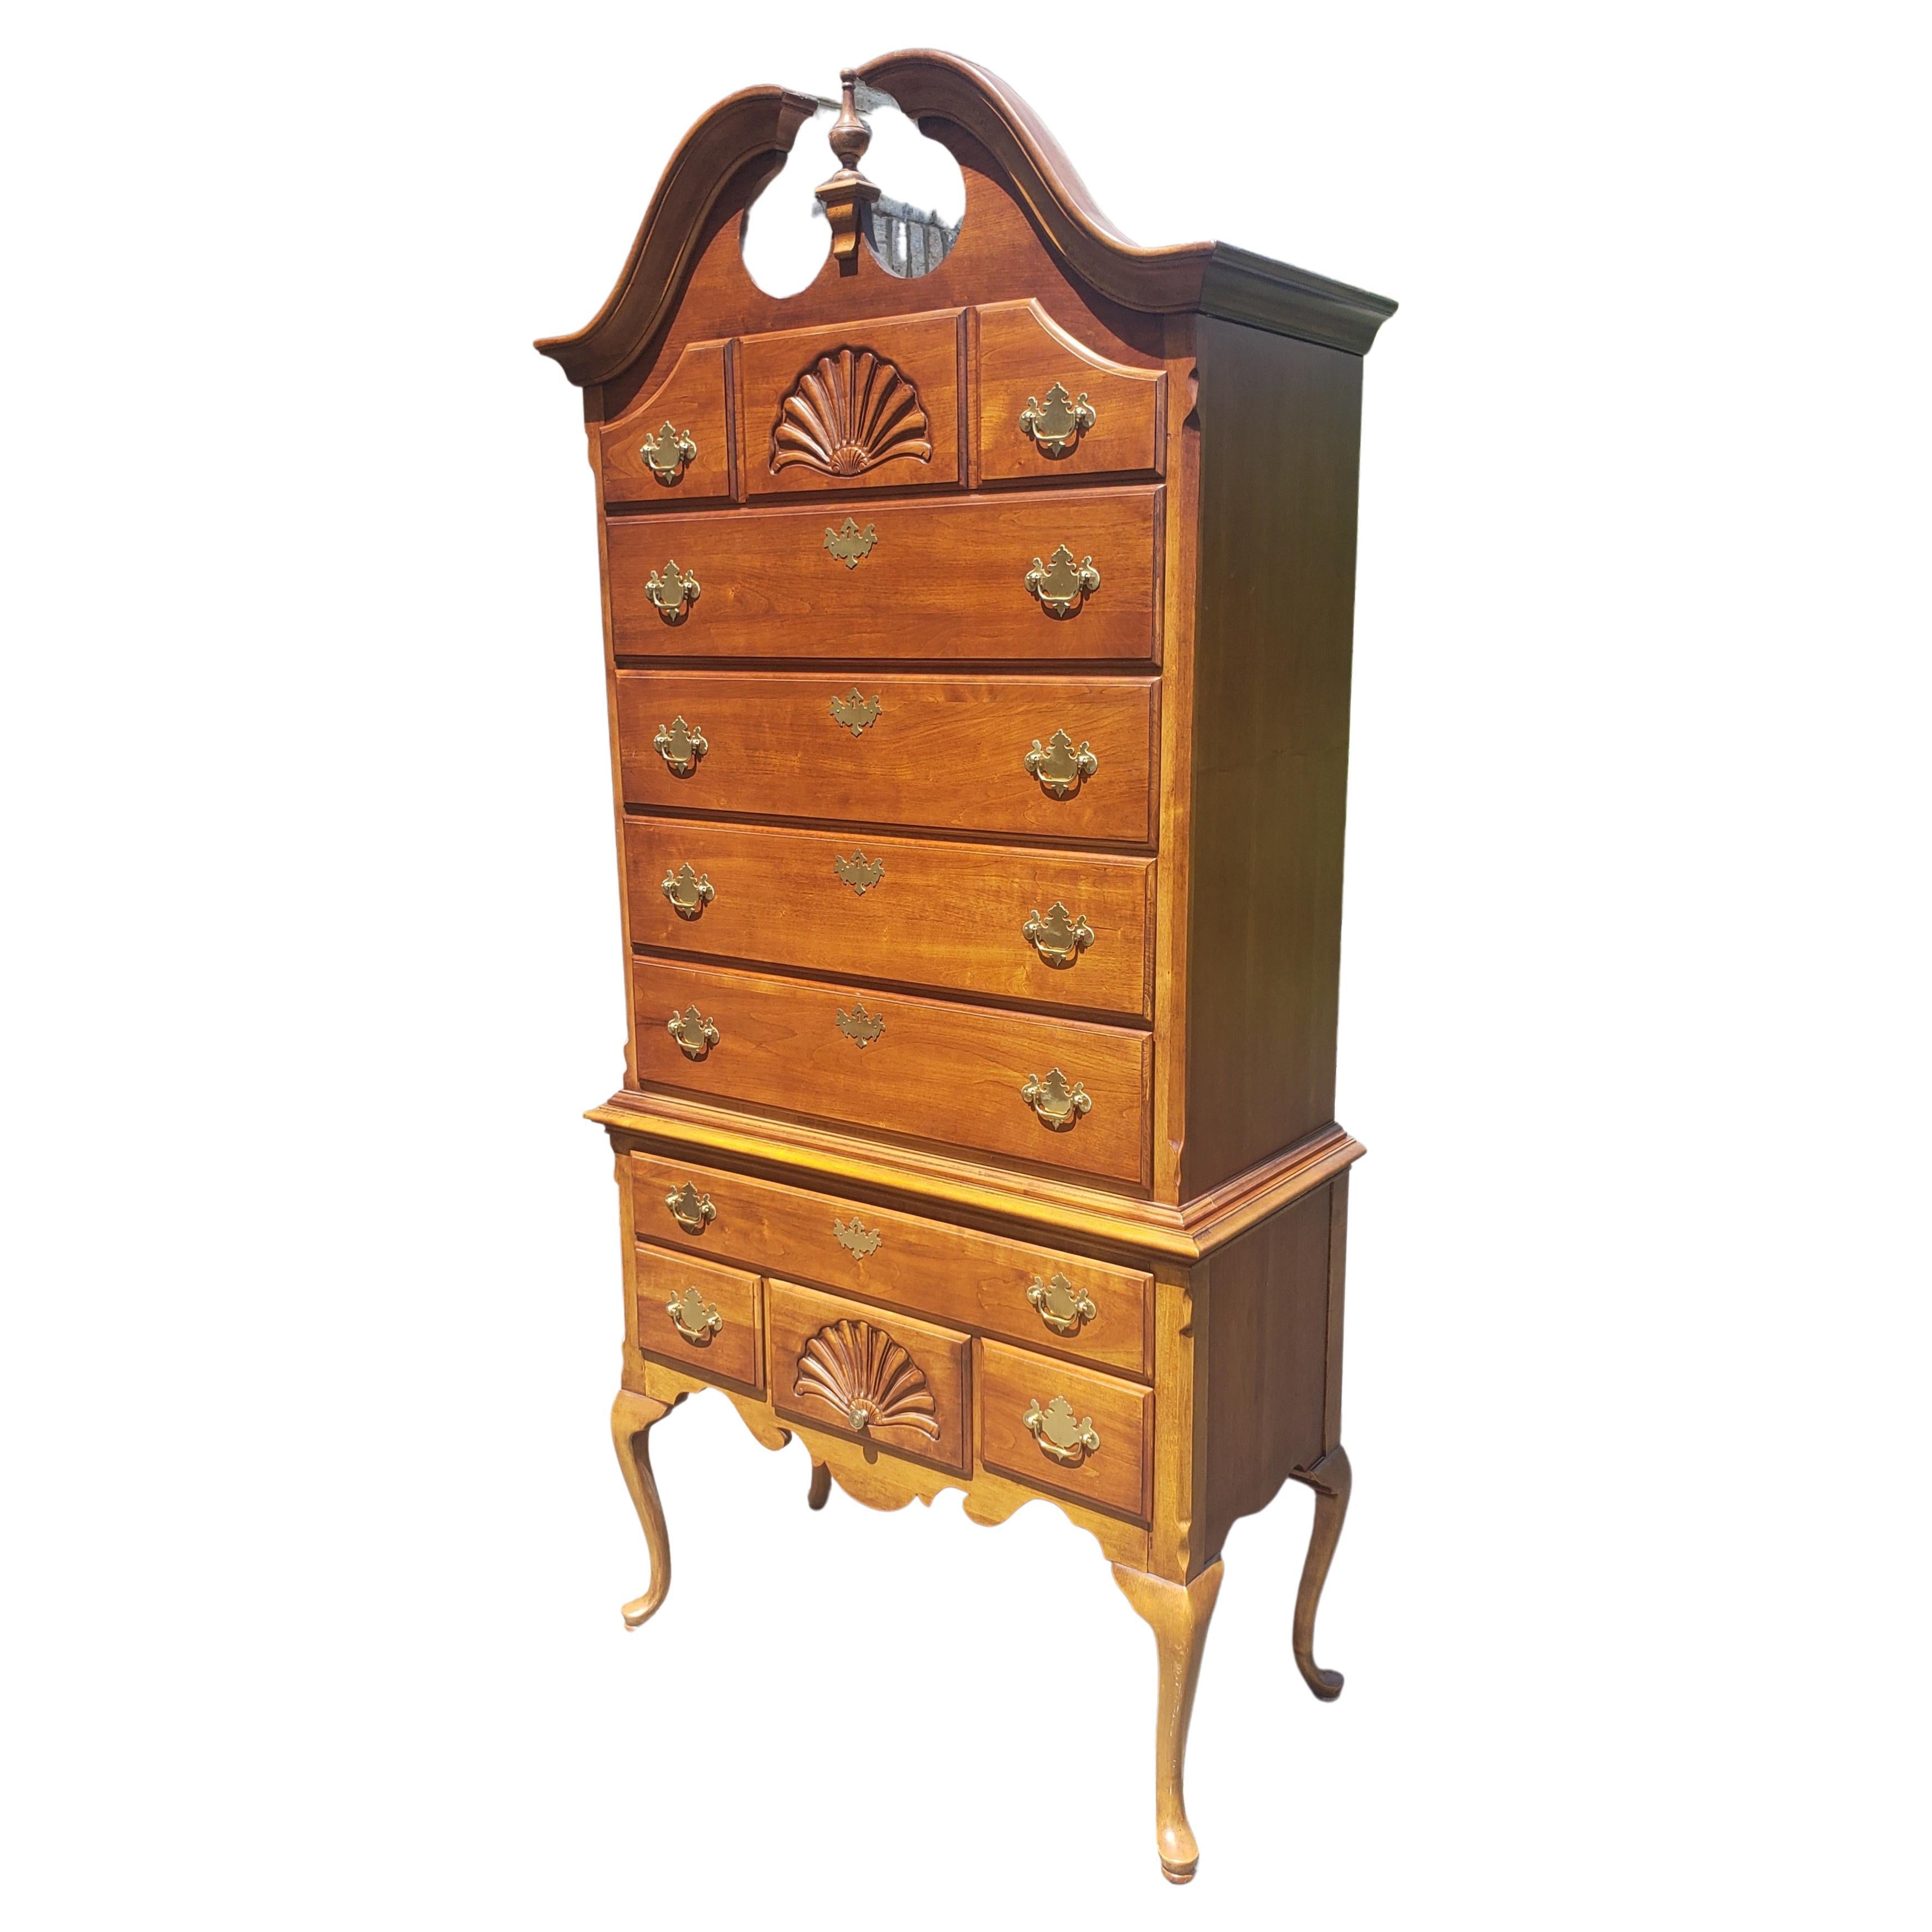 Stanley Furniture's American Craftman Collection Chipoendale cherry high boy.
Solid cherry wood. All smoothly operating dovetailed drawers. Very good vintage condition.
Measures 35